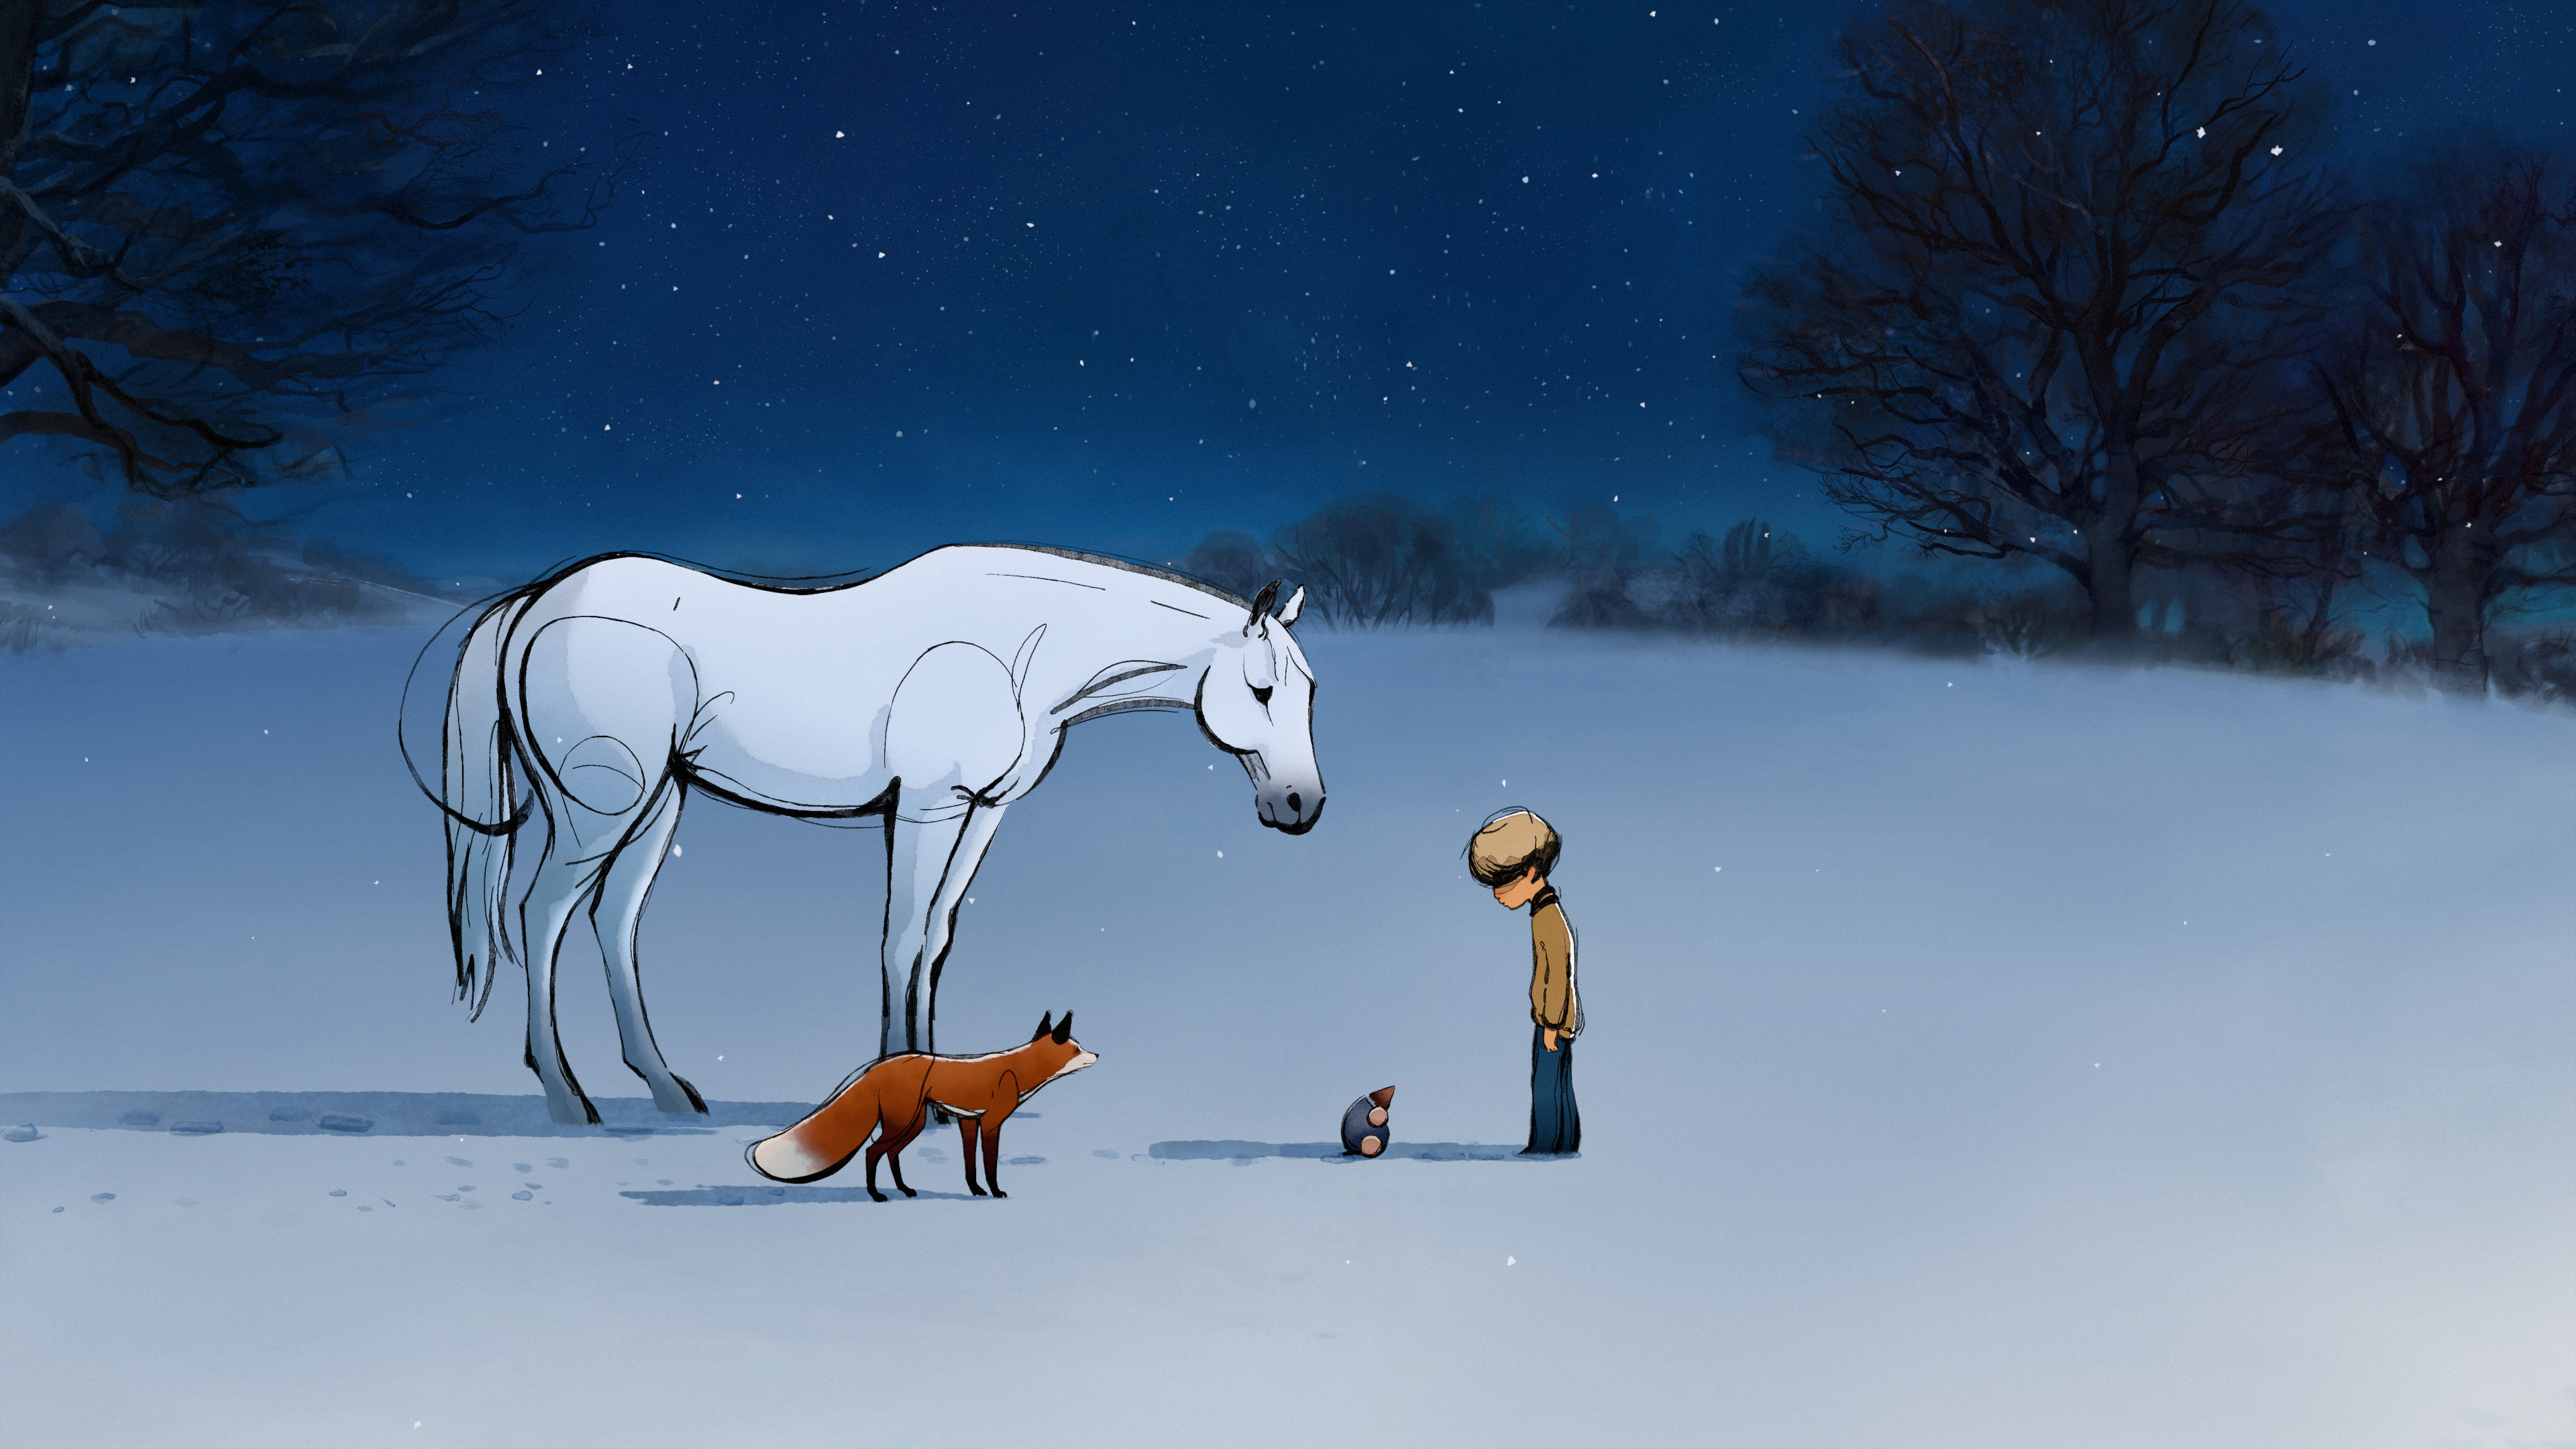 From “The Boy, the Mole, the Fox and the Horse," now streaming on Apple TV+.